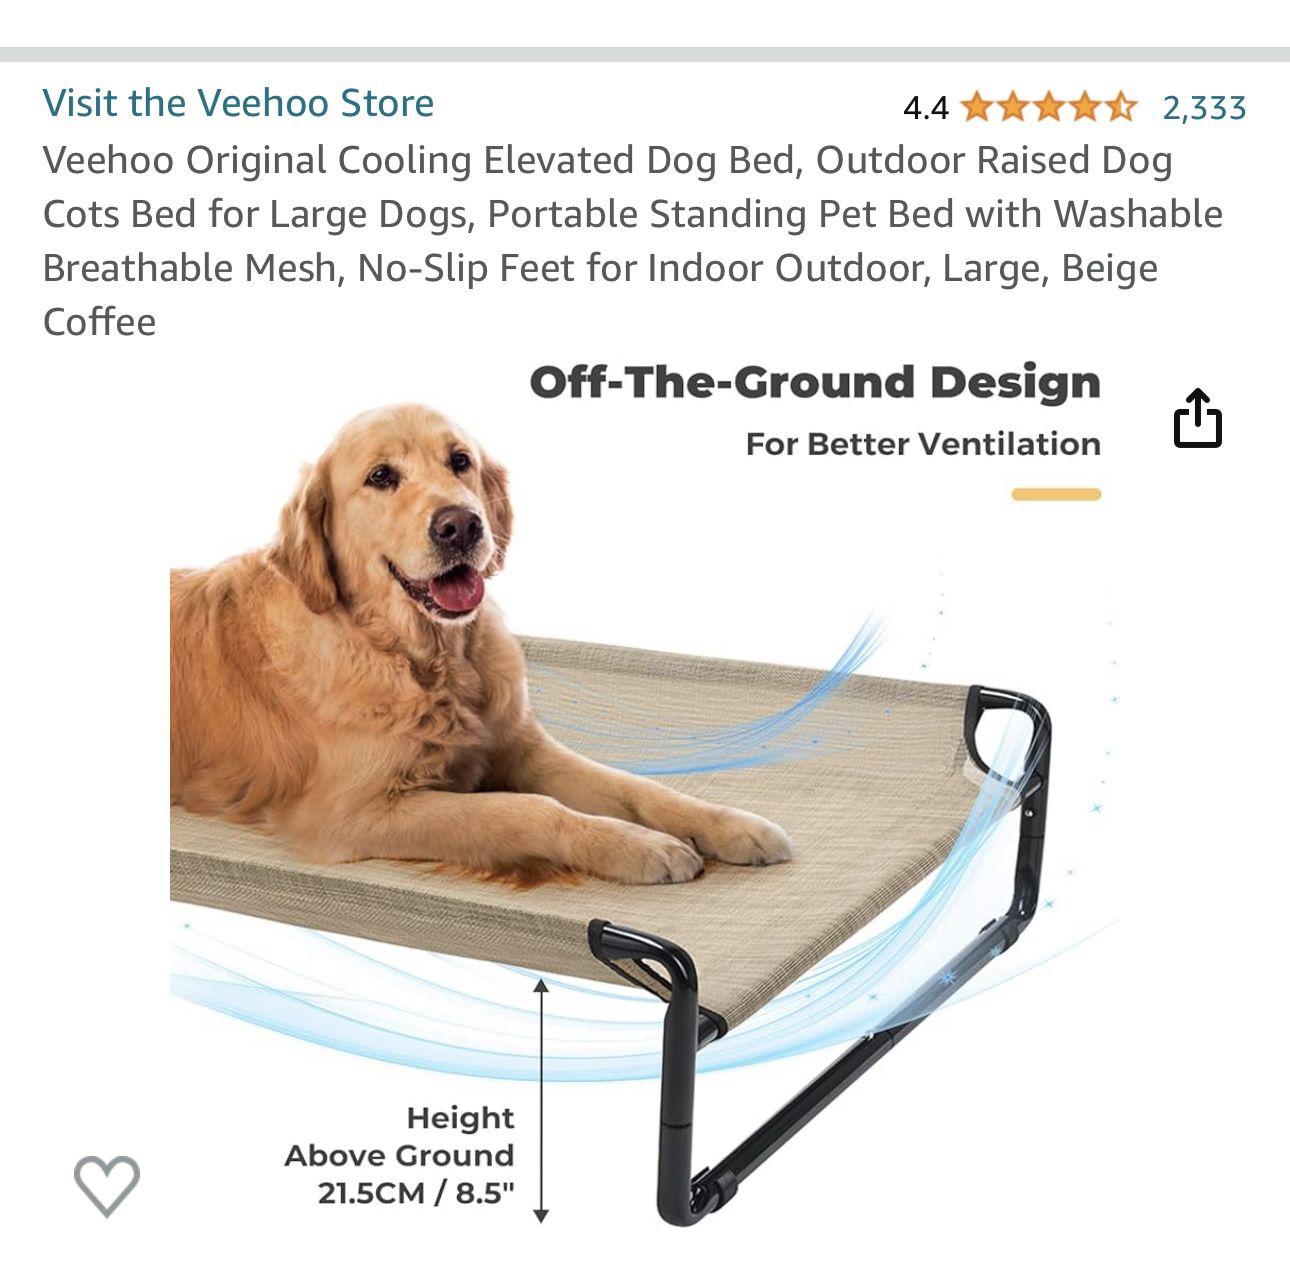 Comfy Canine Retreat: Large Elevated Dog Bed - Free!(Sleepy Hollow)